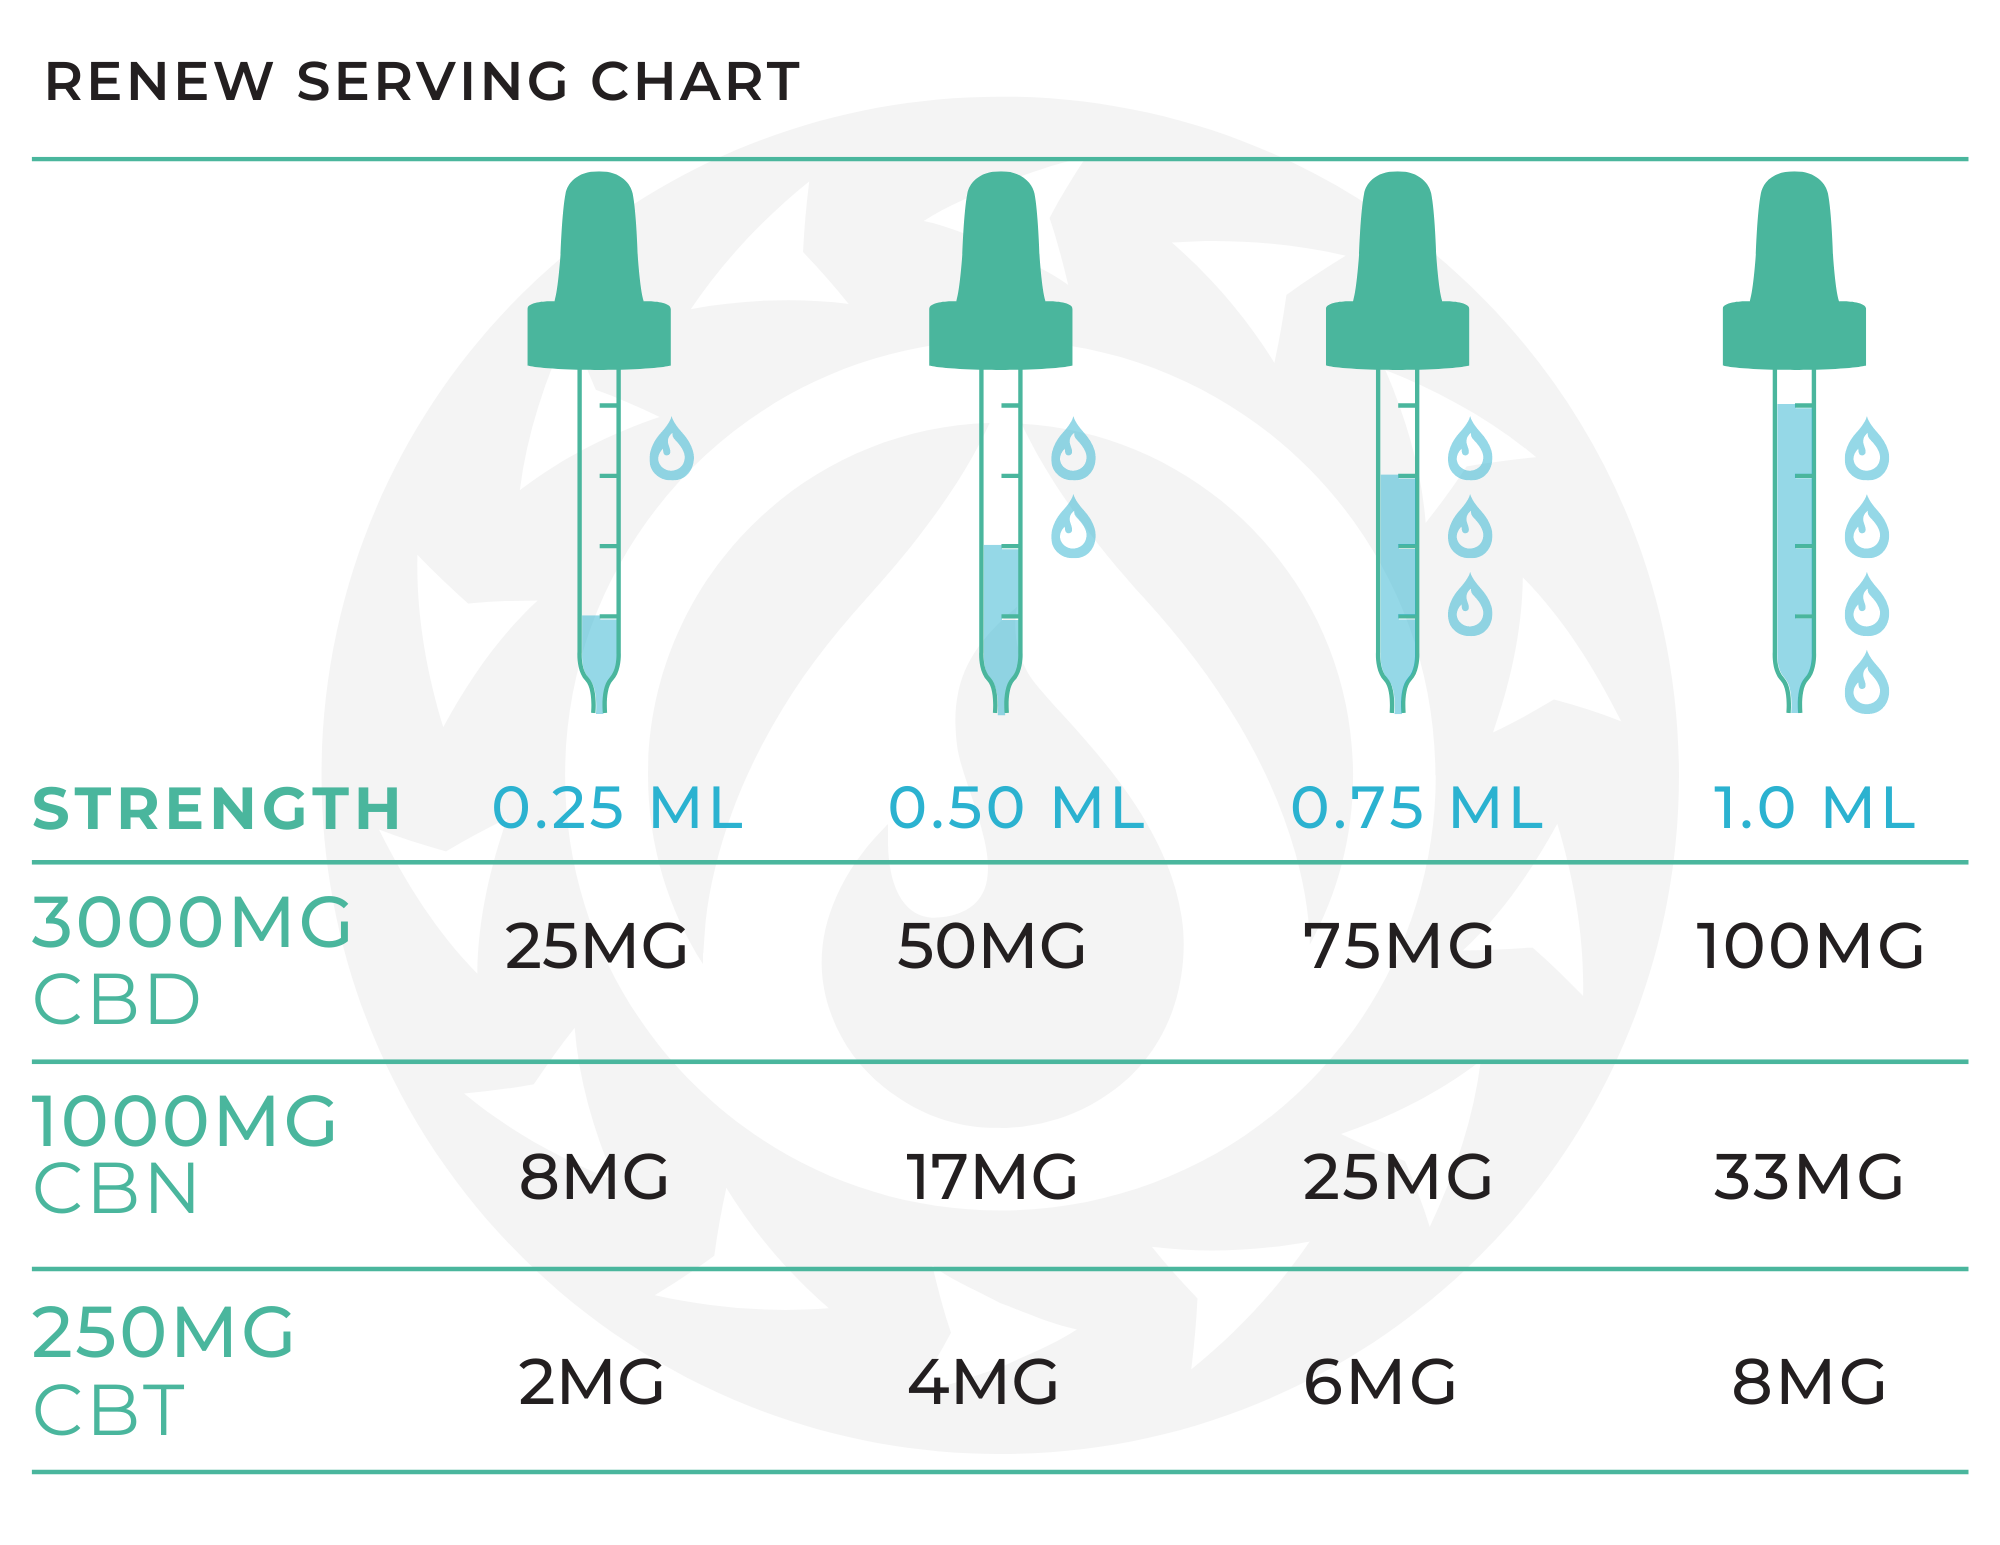 Renew Tincture Serving Chart. 50MG of CBD, 17MG of CBN and 4MG of CBT per 1/2 mL